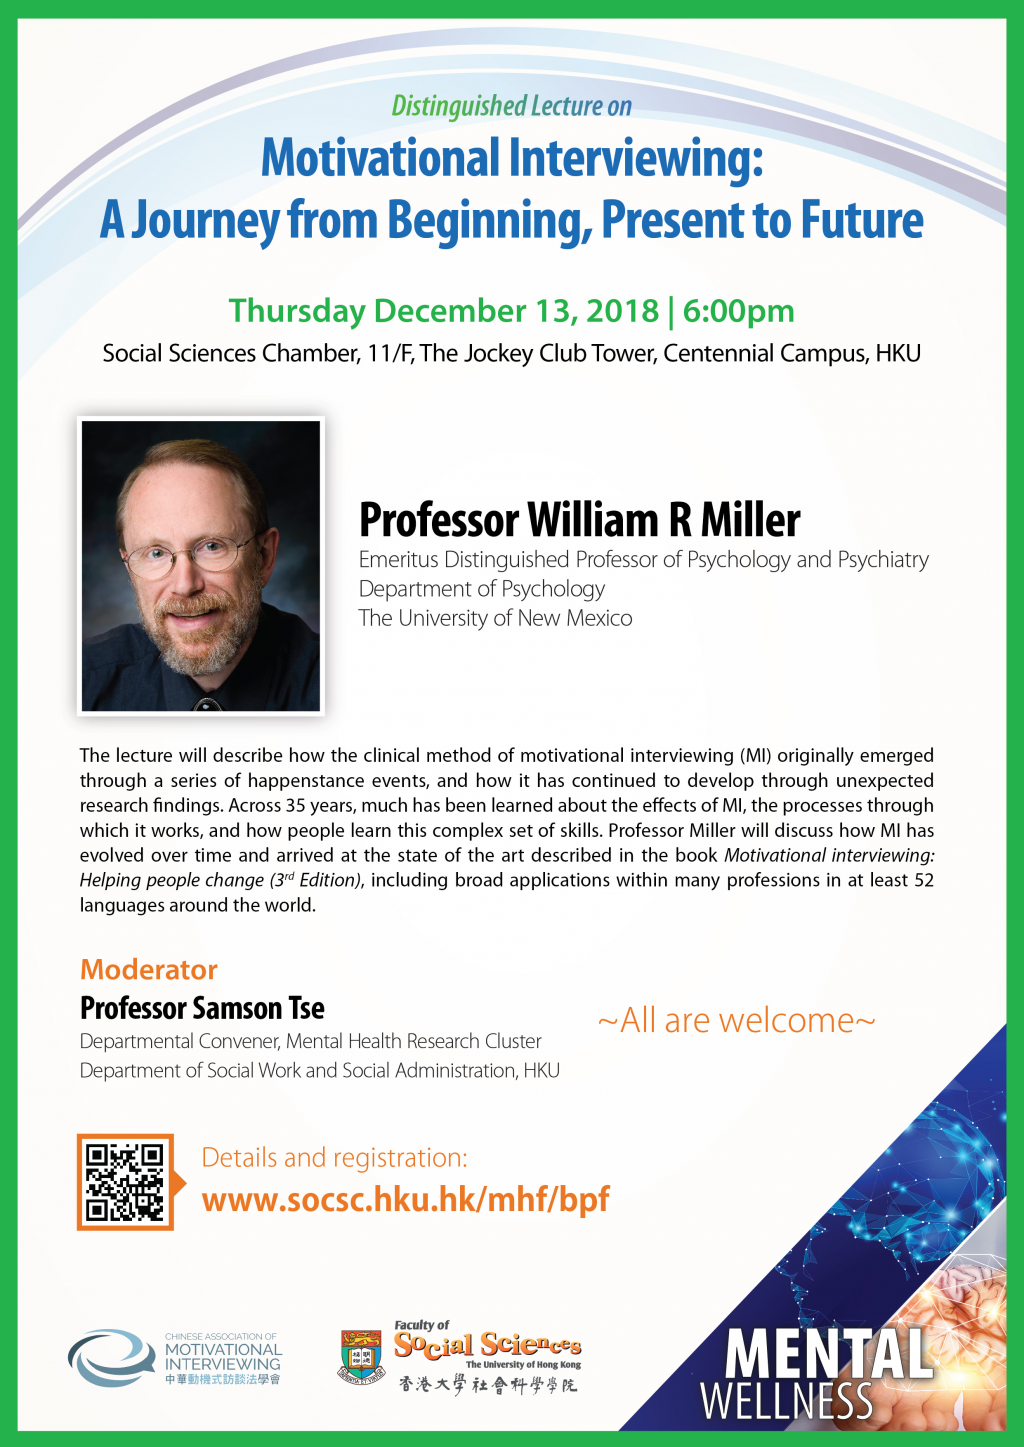 Mental Wellness Distinguished Lecture on Motivational Interviewing: A Journey from Beginning, Present to Future